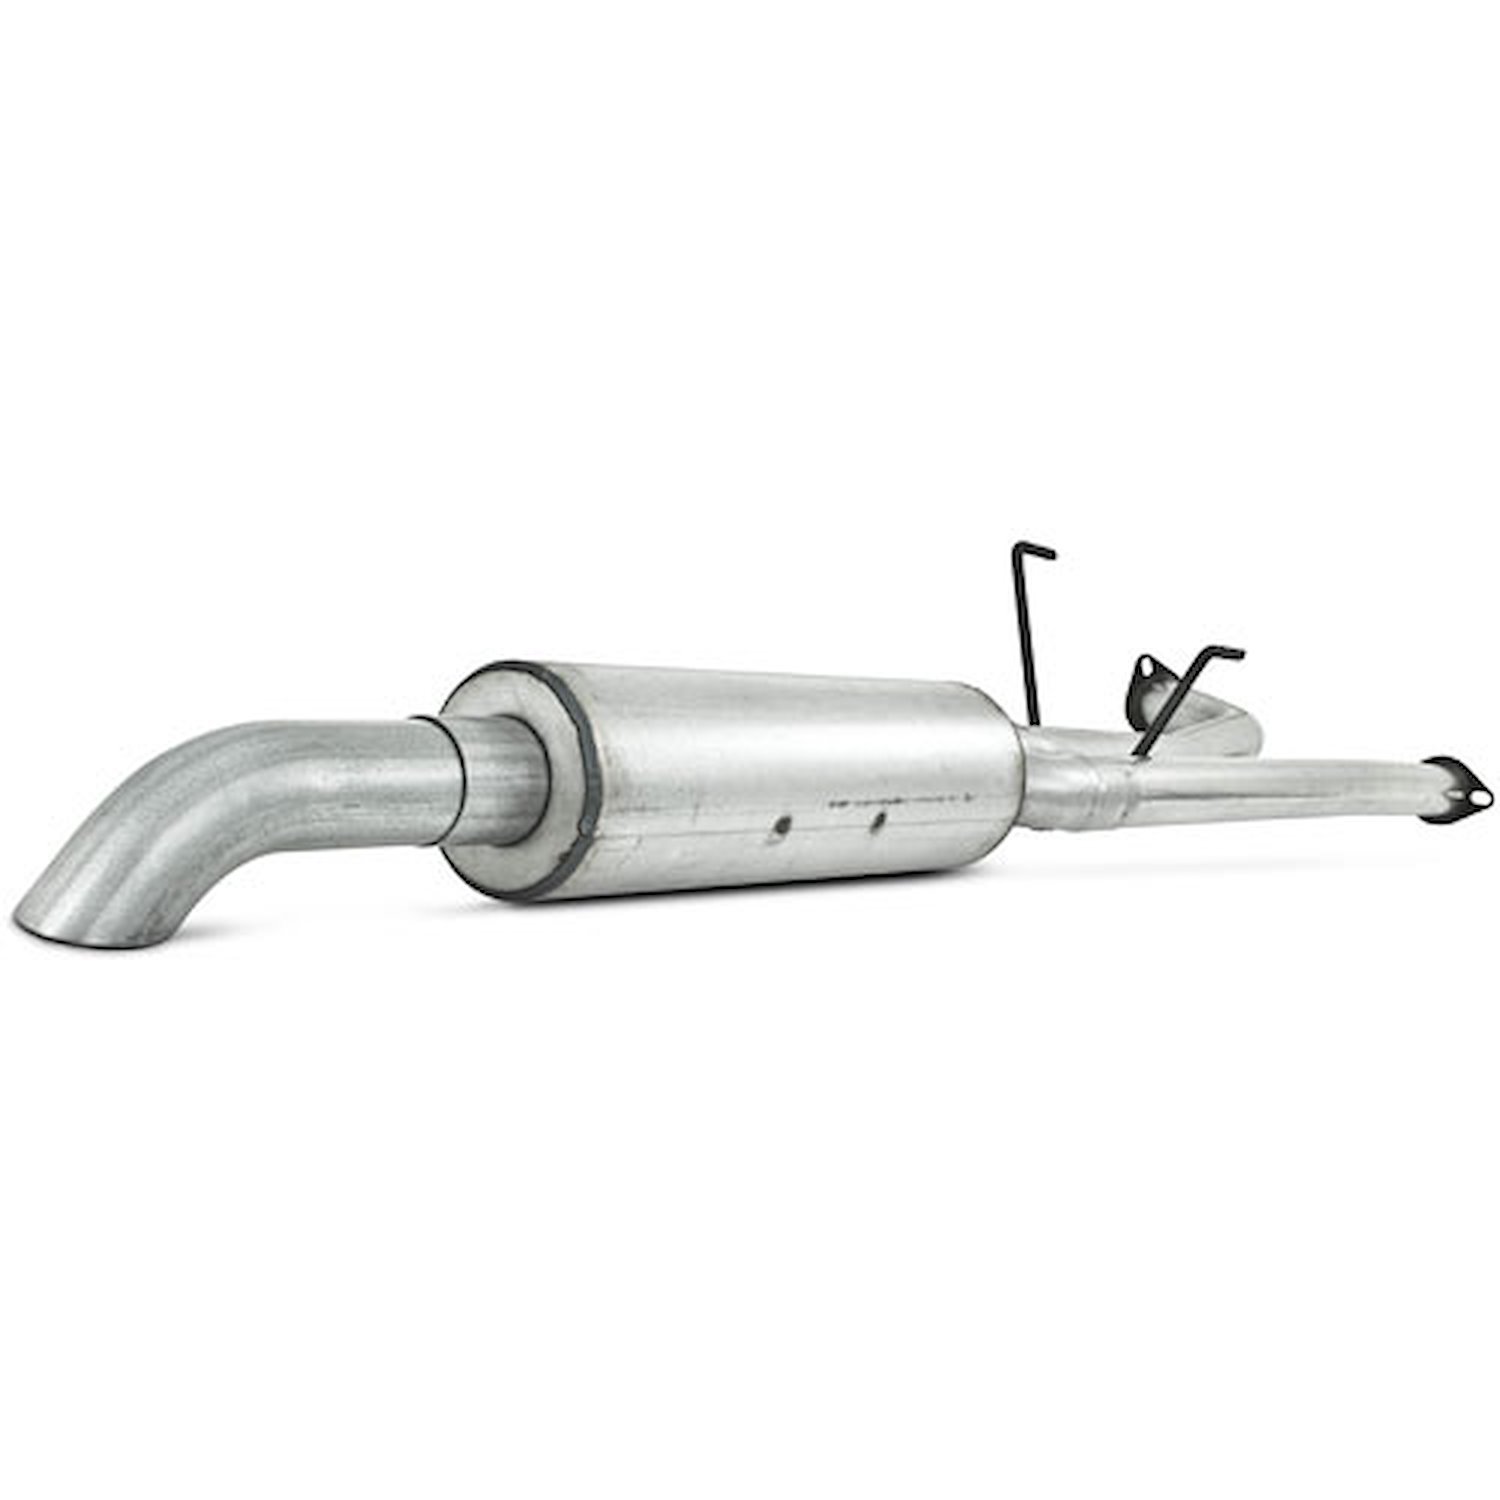 Installer Series Exhaust System Toyota Tundra: 2007-08 5.7L and 2007-09 4.7L